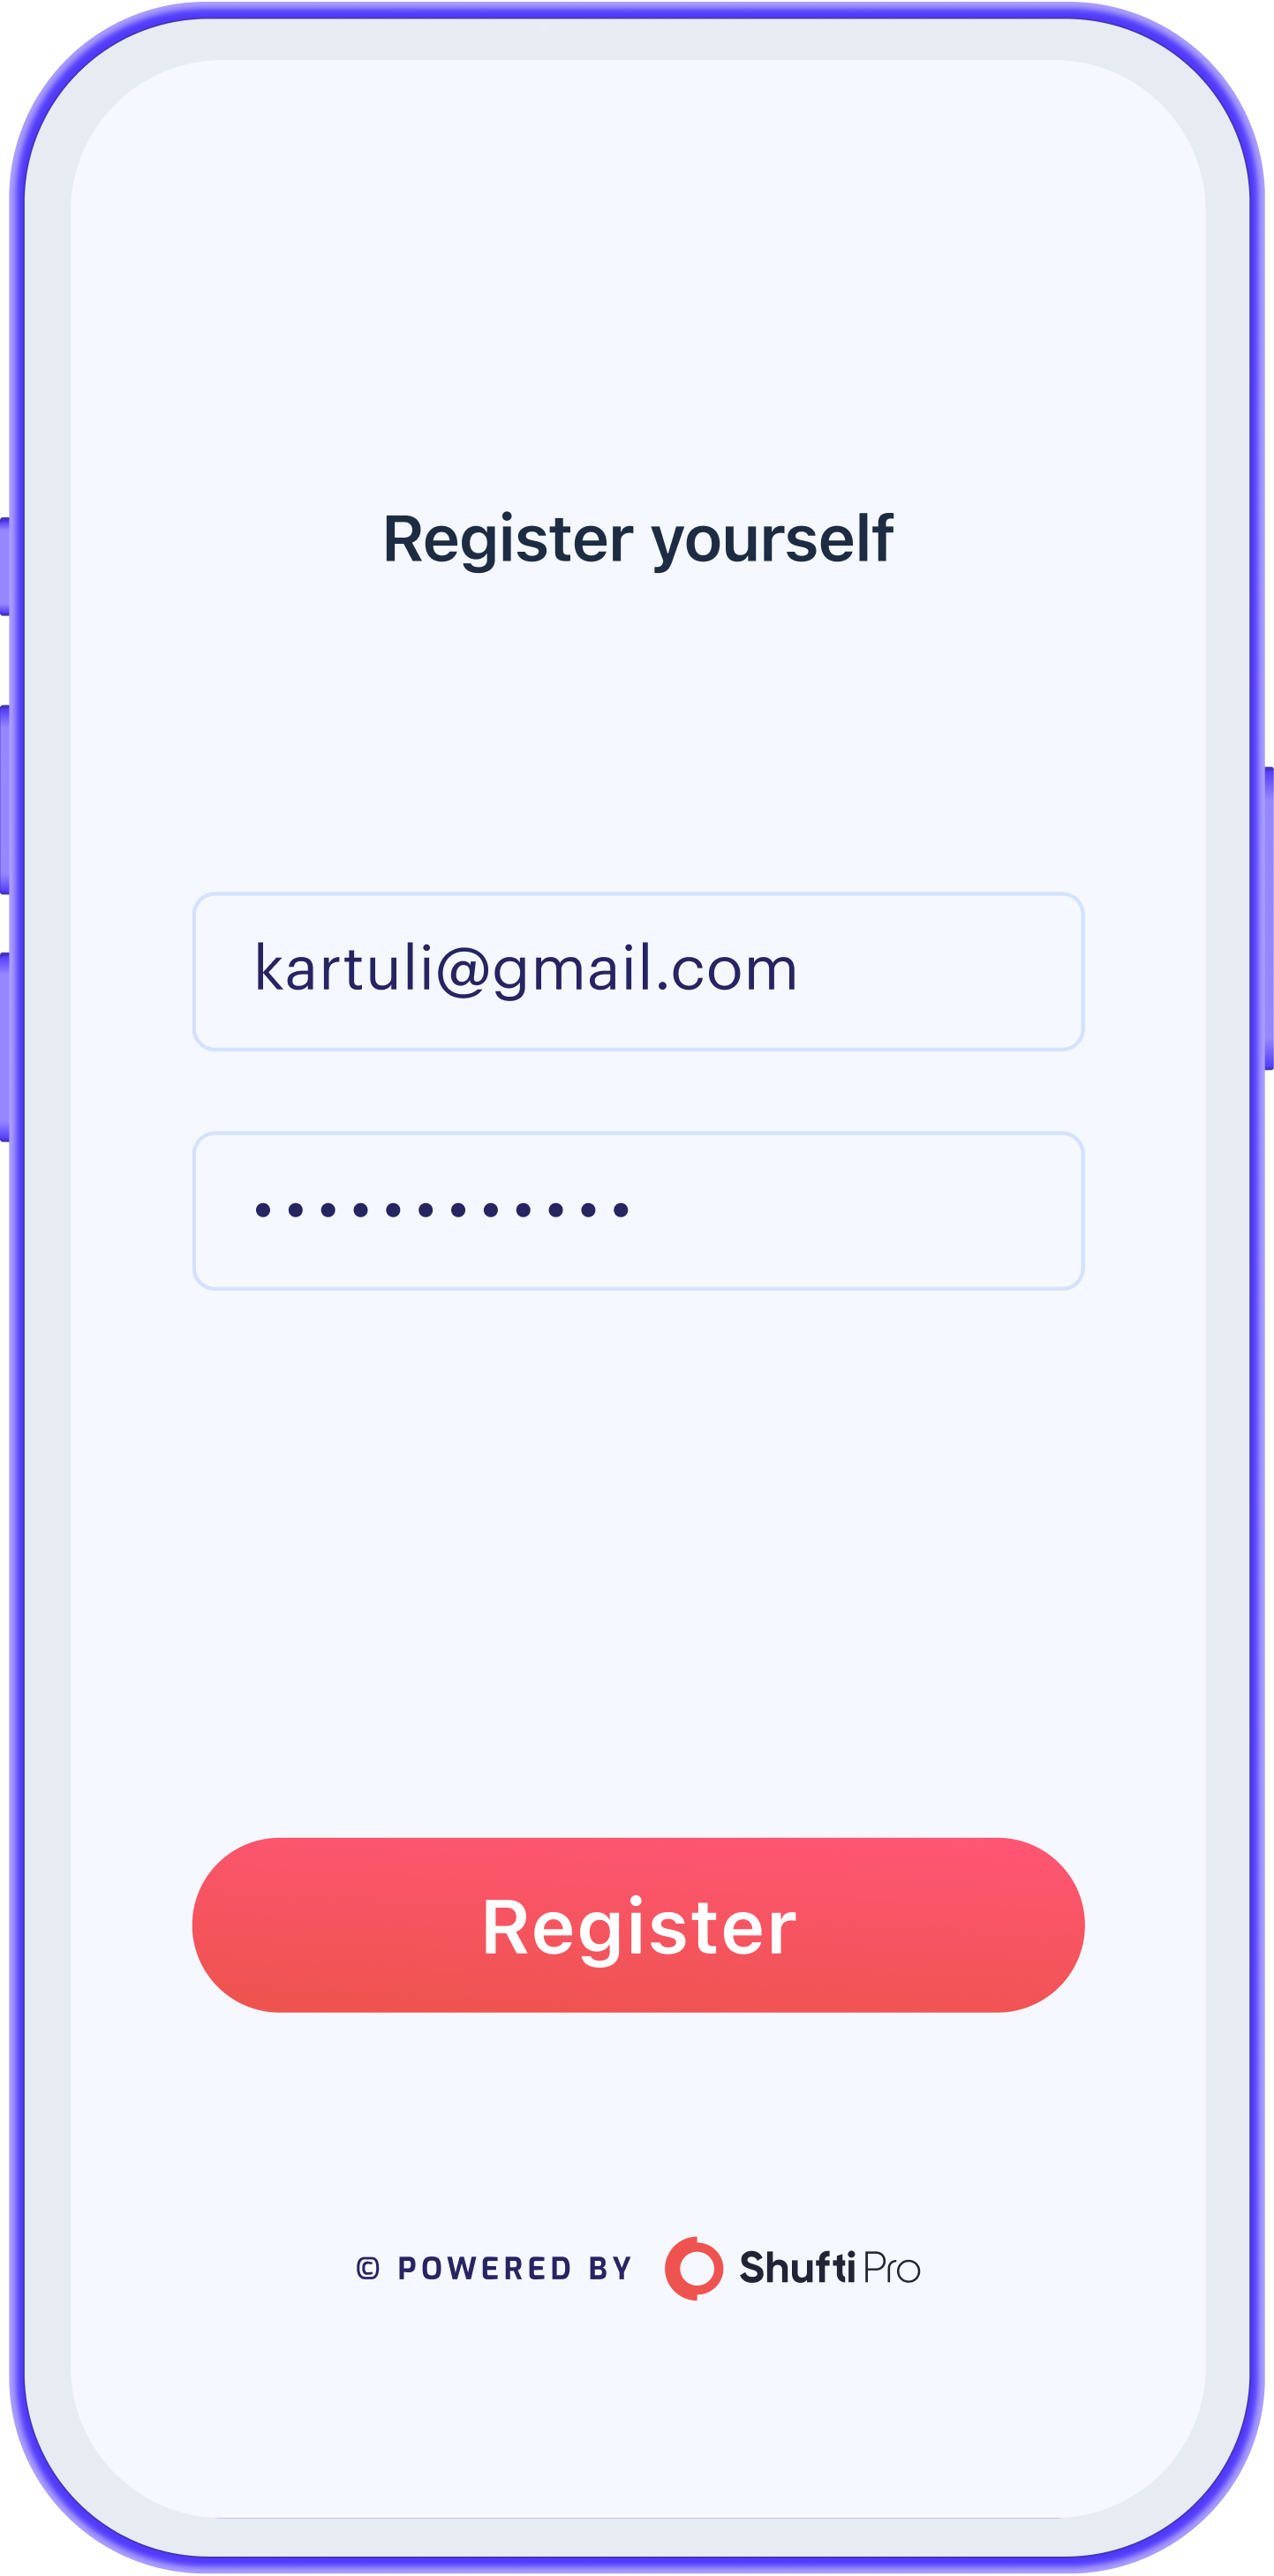 sign up